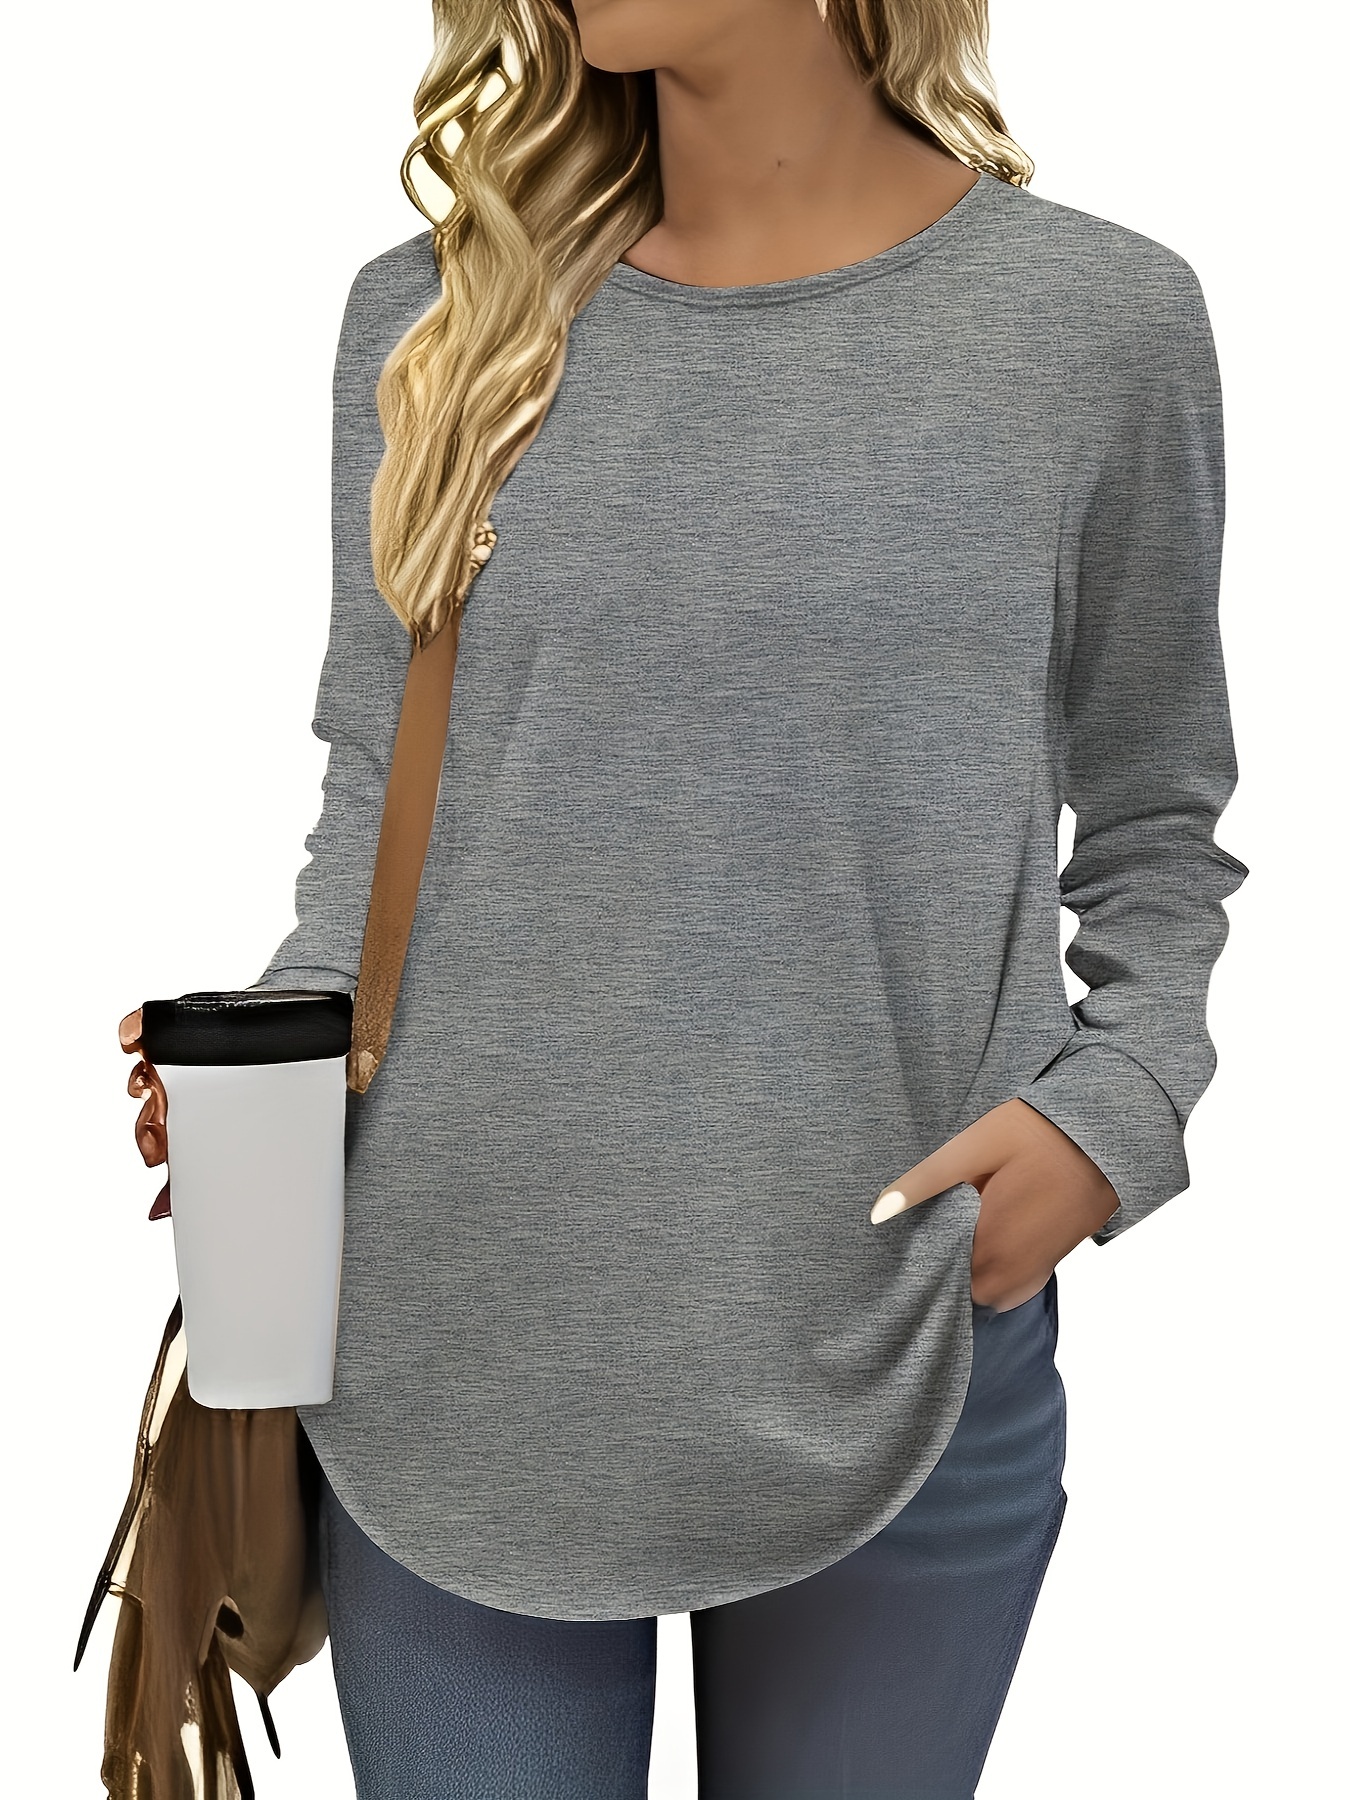 Tunic Tops for Leggings Long Sleeve Crew Neck Soft Tunic Top Curved Hem  Tshirt Women Trendy Made in USA -  Canada